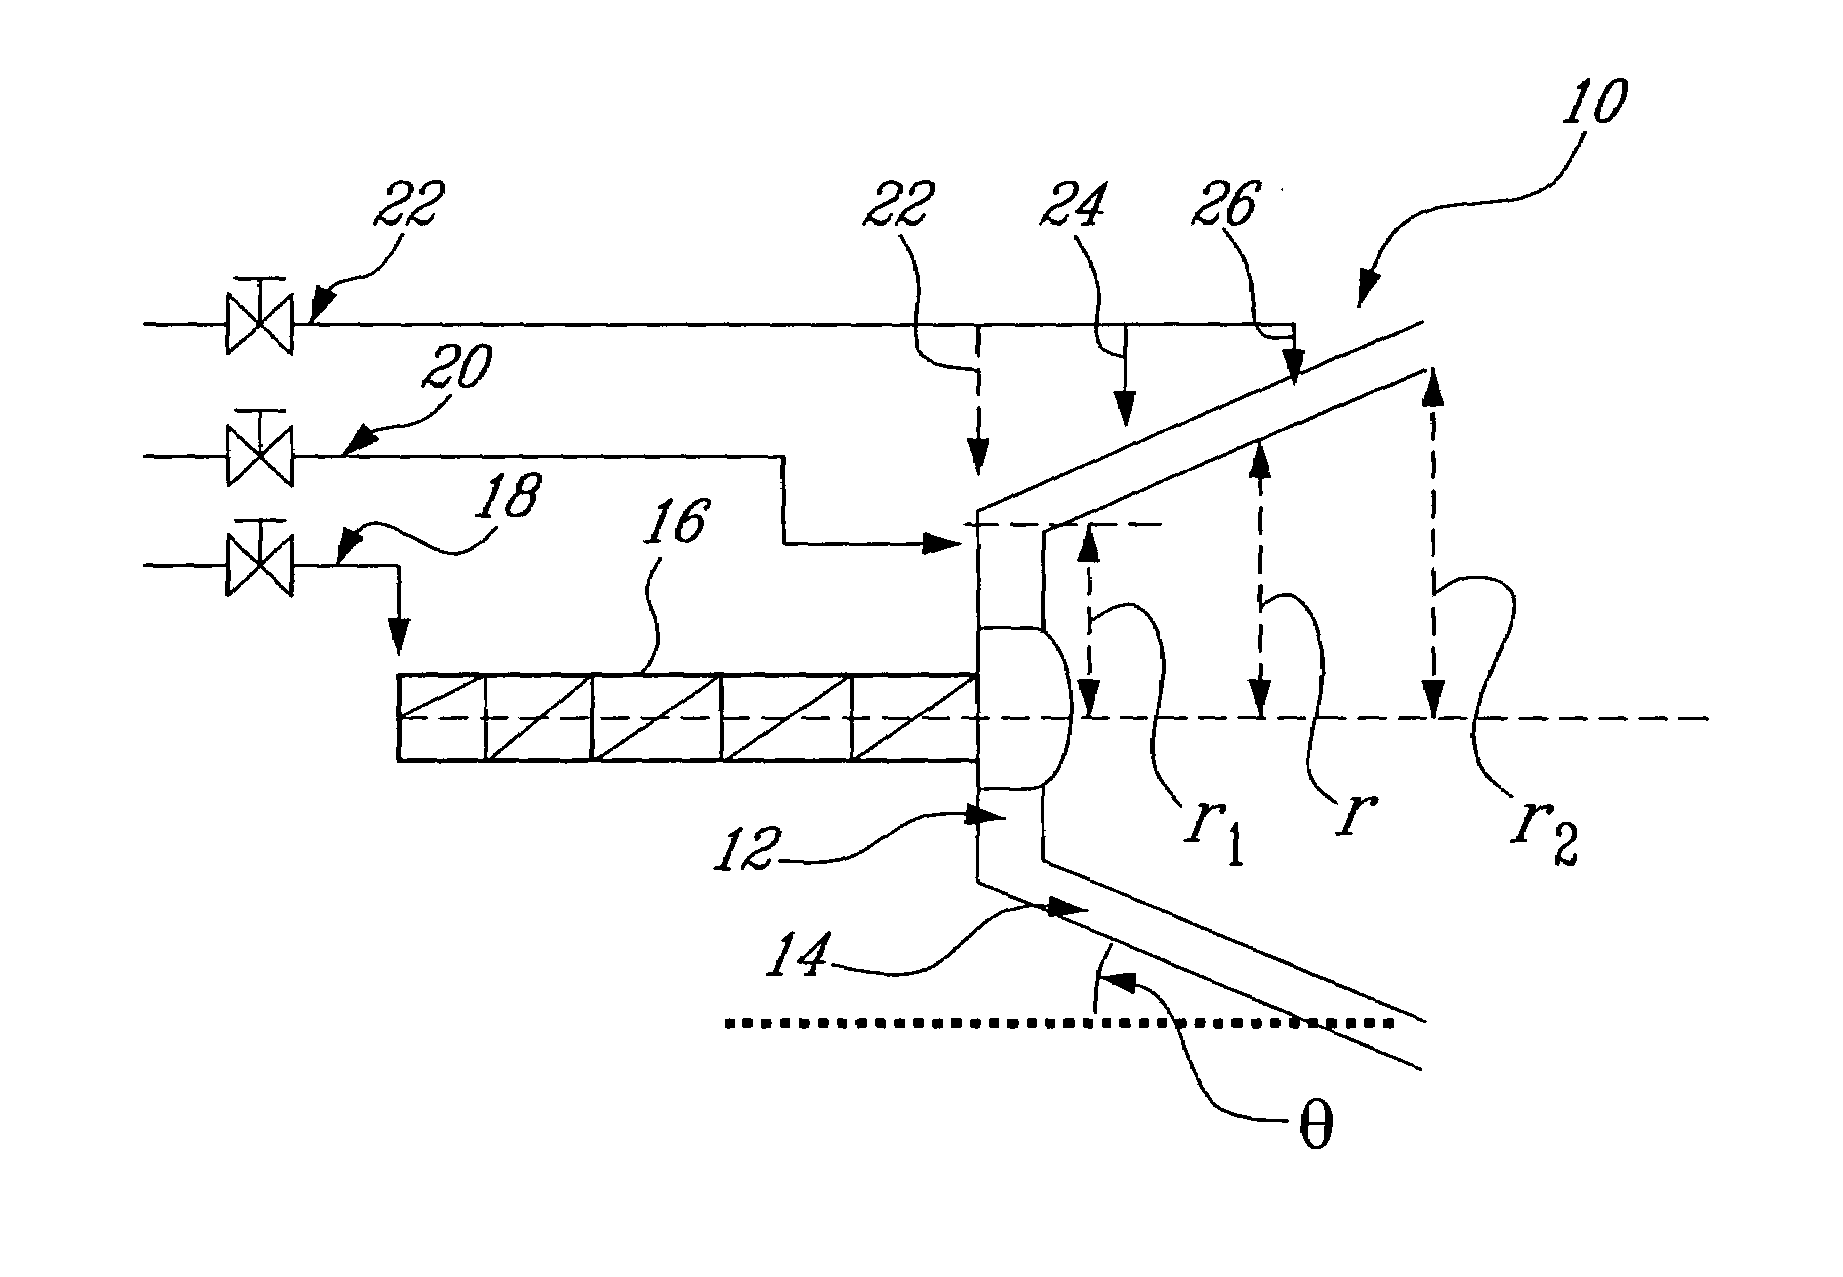 Method of refining wood chips or pulp in a high consistency conical disc refiner